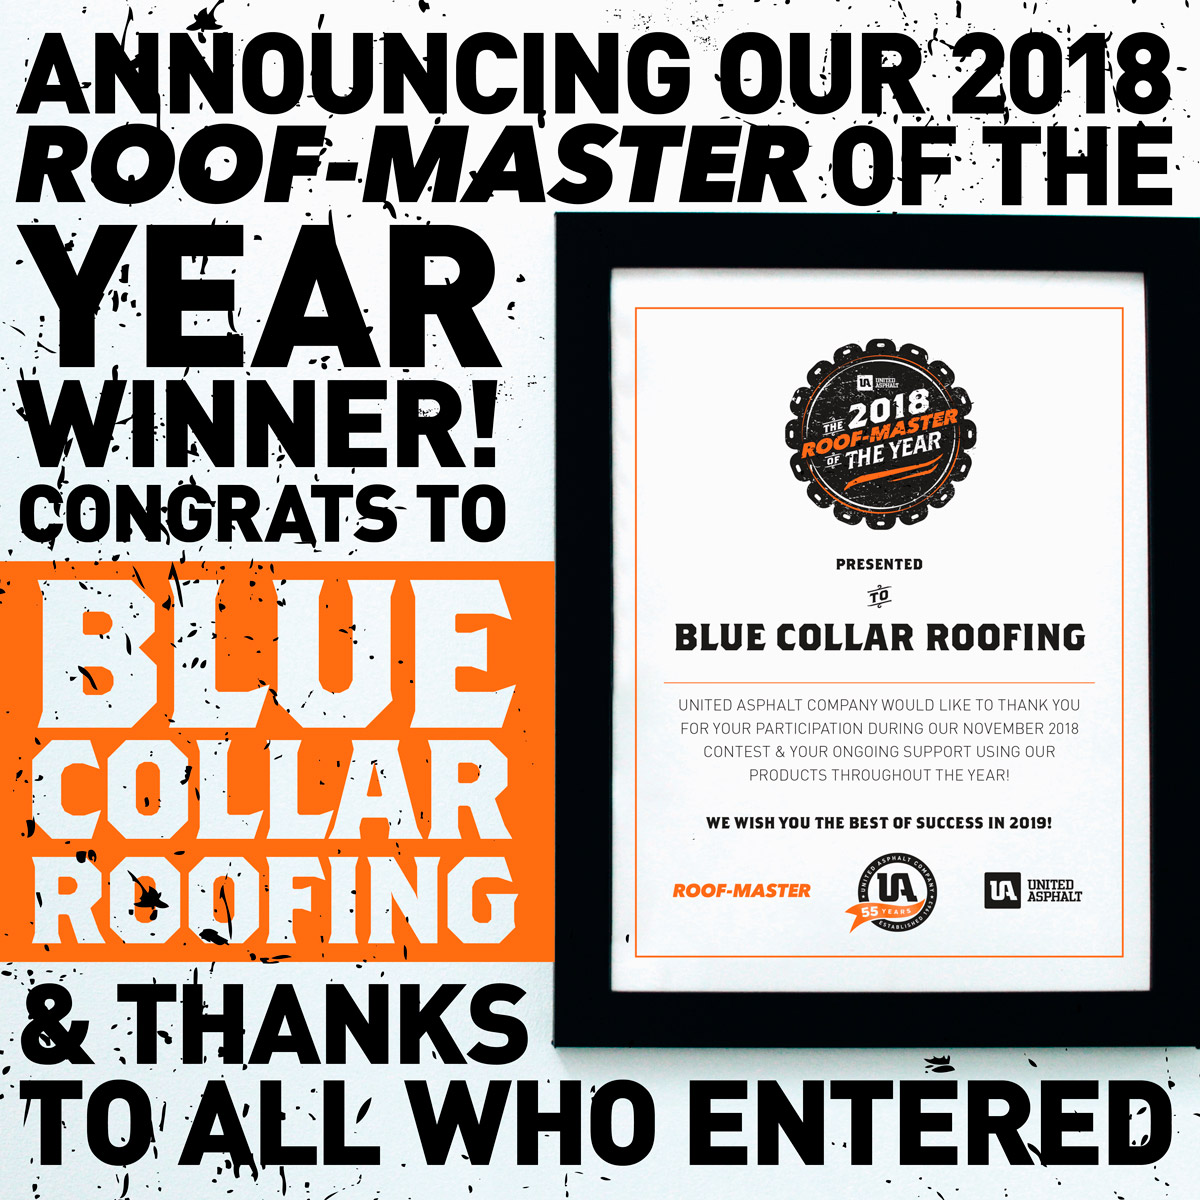 Announcing Our 2018 Roof-Master of the Year Winner! Congrats to Blue Collar Roofing & Thanks to All Who Entered!